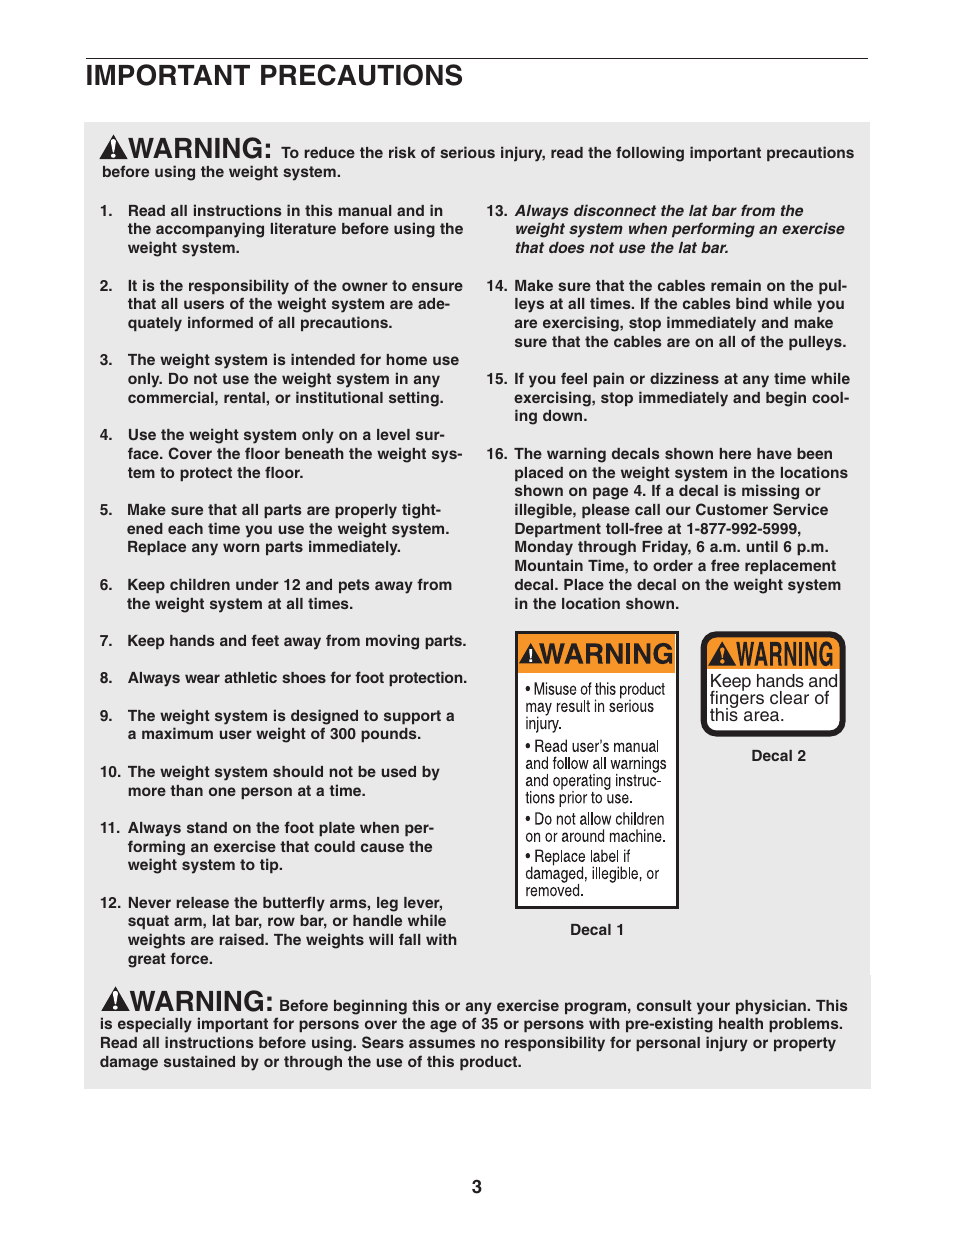 Important precautions, Warning | Weider Pro 4850 831.153932 User Manual | Page 3 / 33